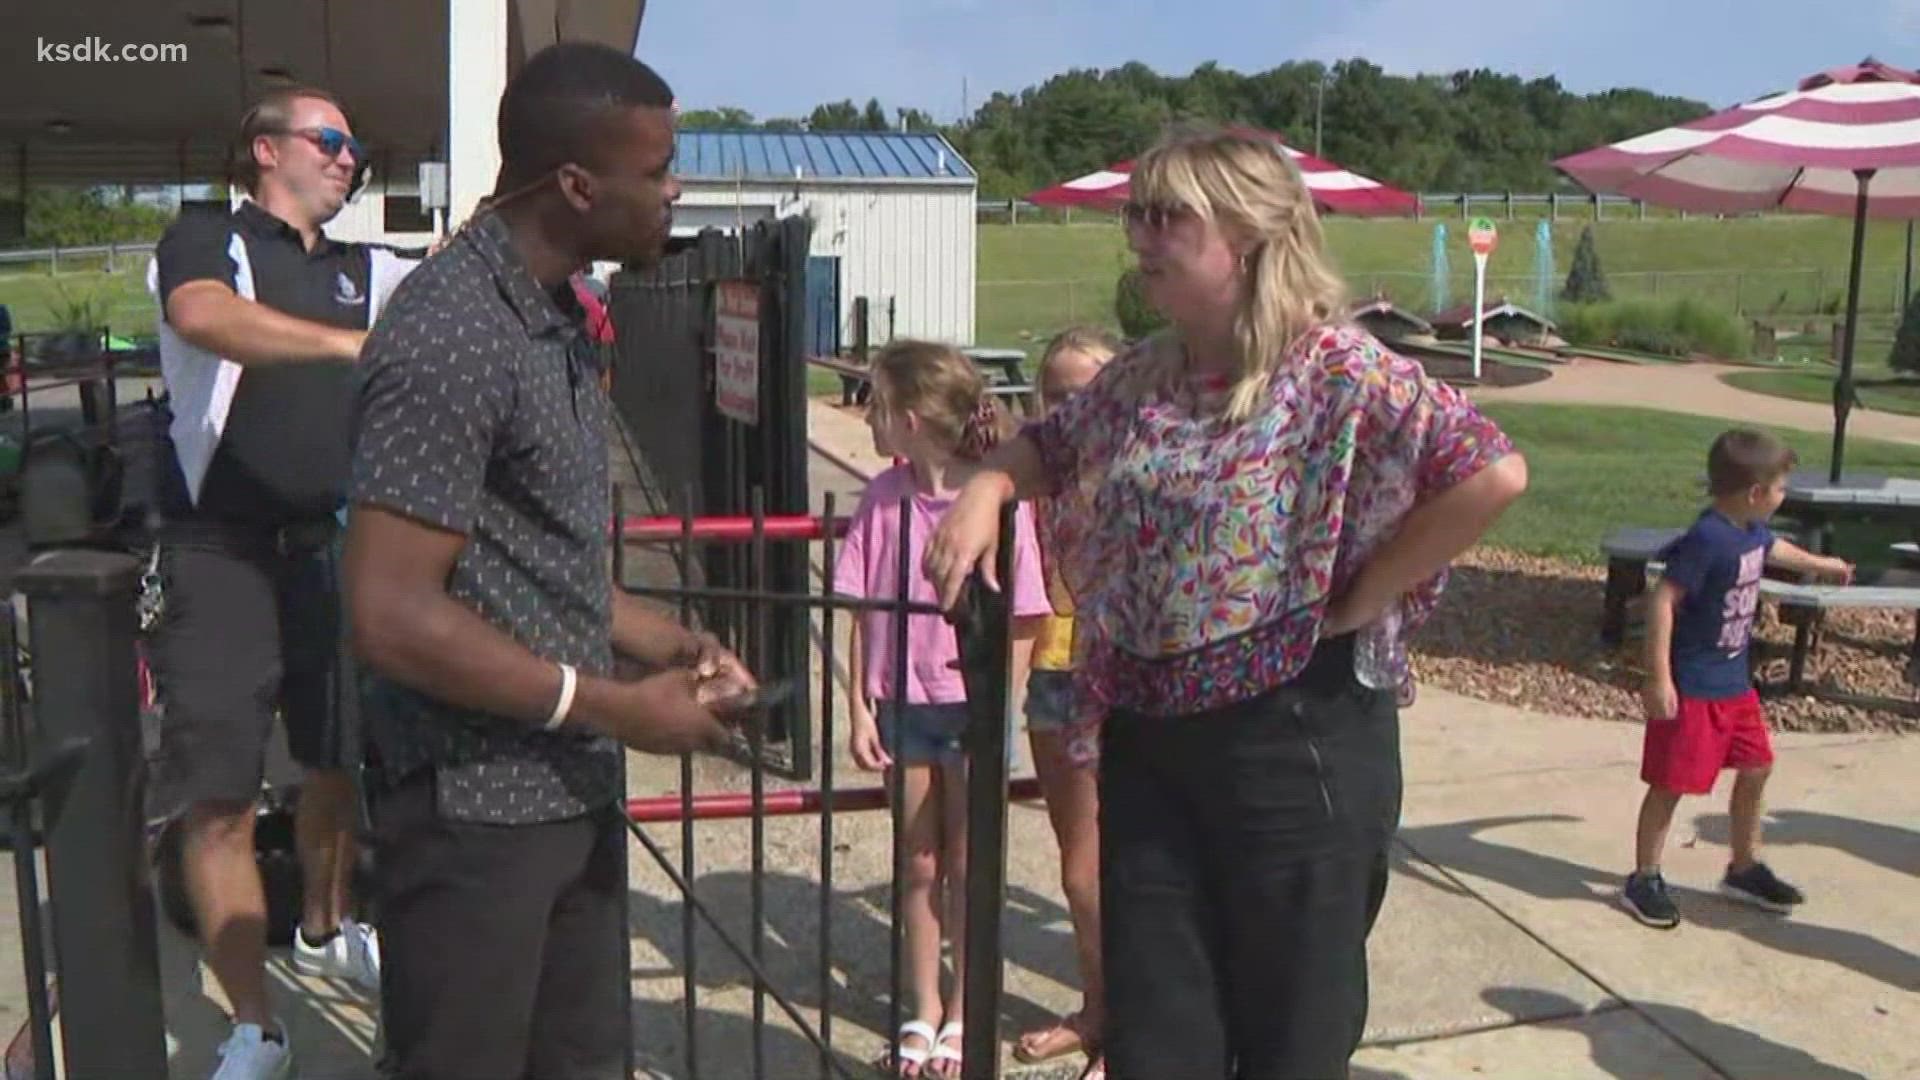 Show Me St. Louis reporter Malik Wilson stopped by a place where ‘Only Fun is Allowed’.